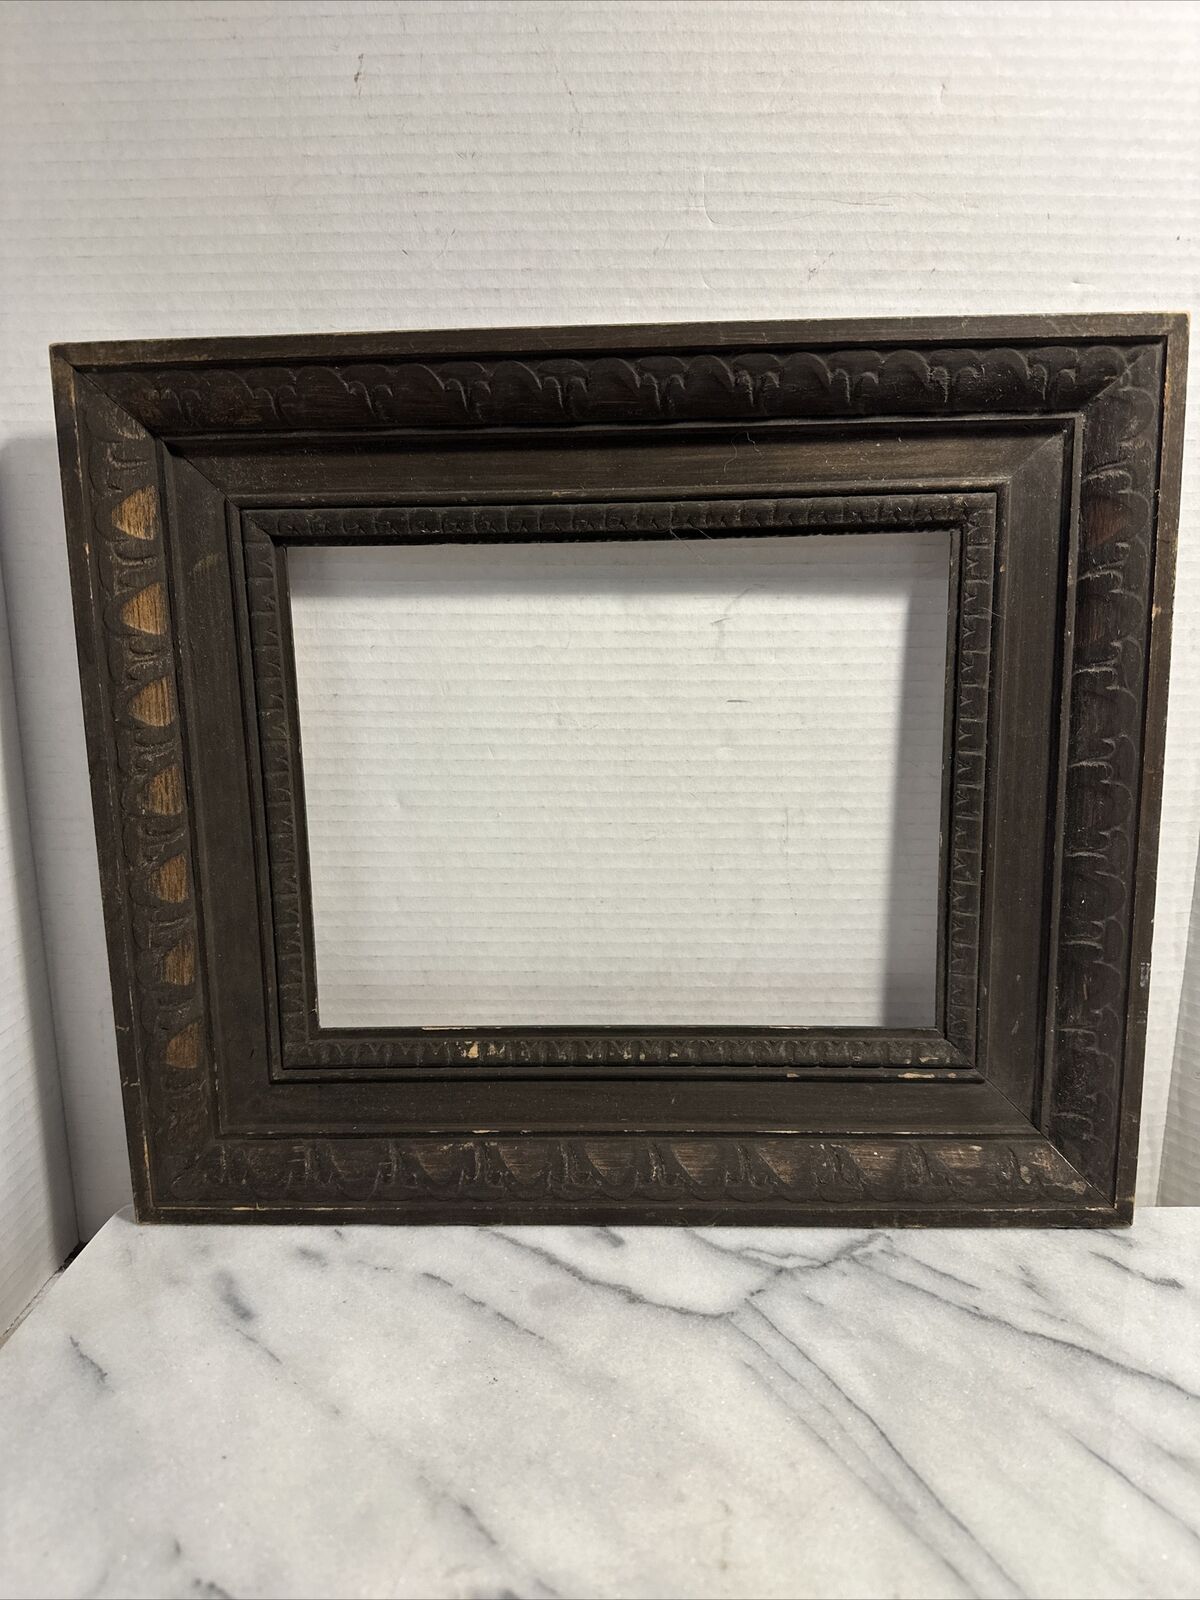 Antique Old wooden frame decorative Carved 10.5x8.7” Back Opening For Art/ Photo